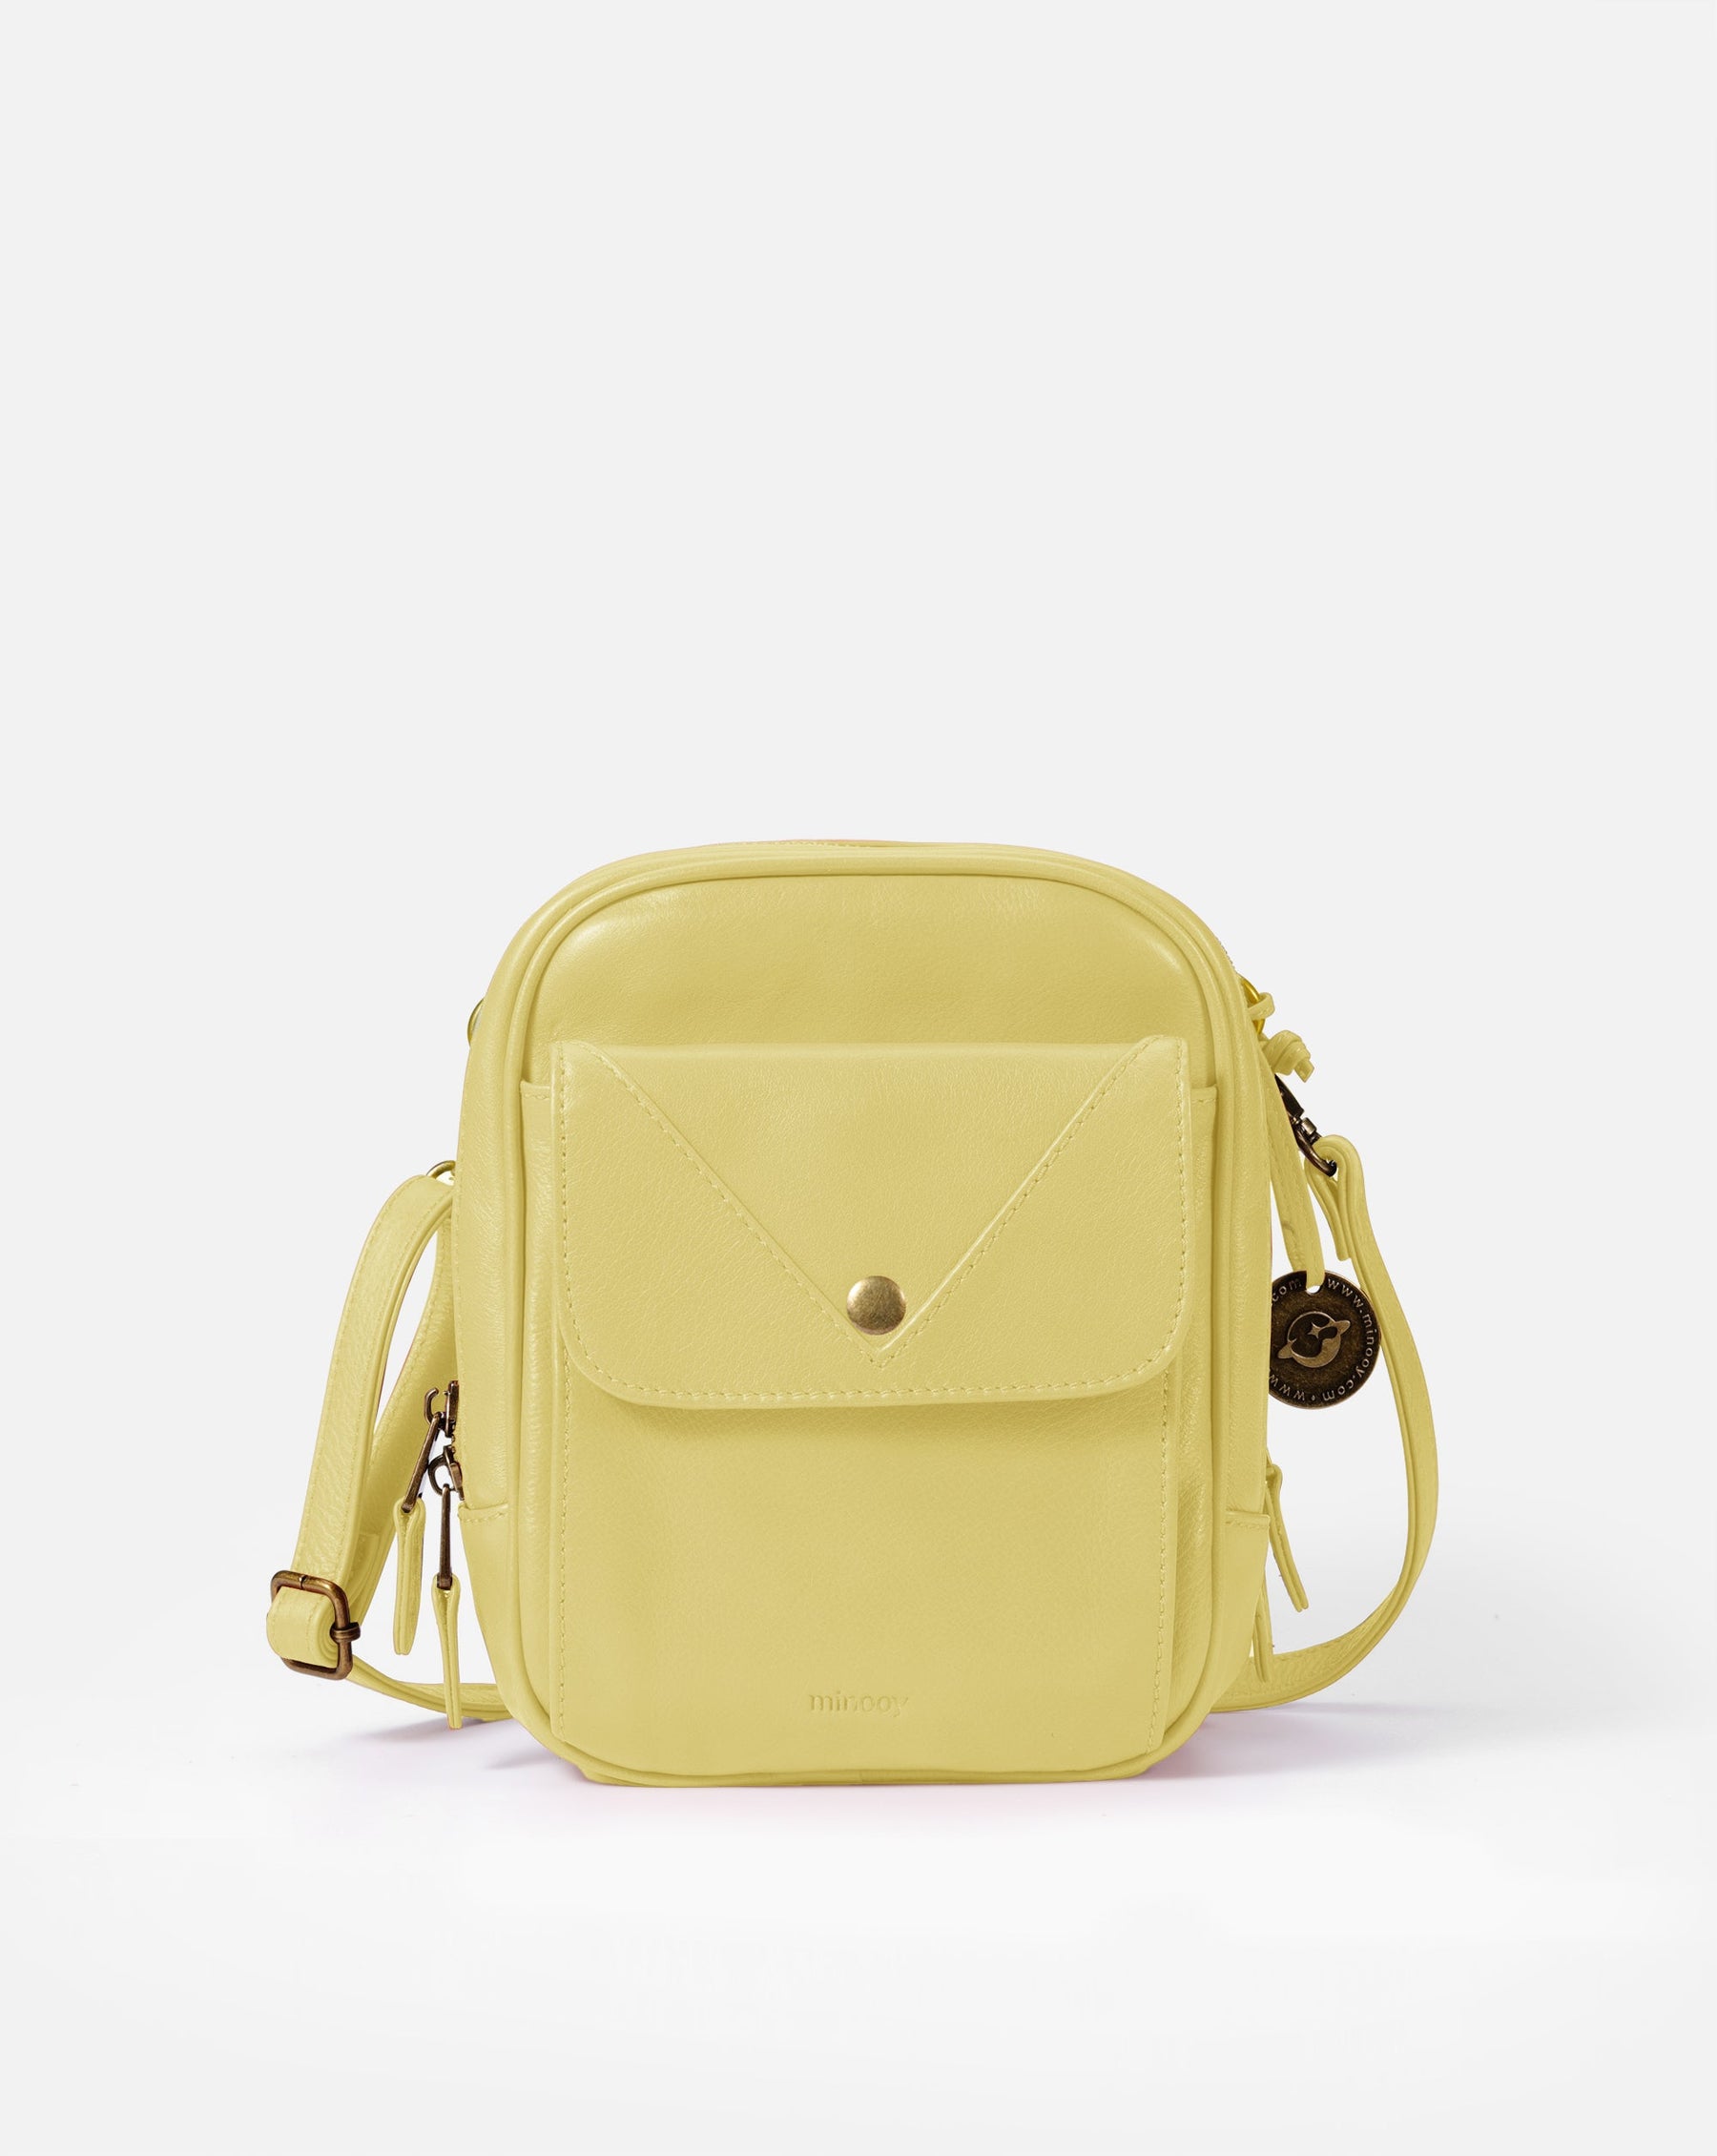 Is the Minooy Thea Crossbody bag the best travel bag in 2023? 